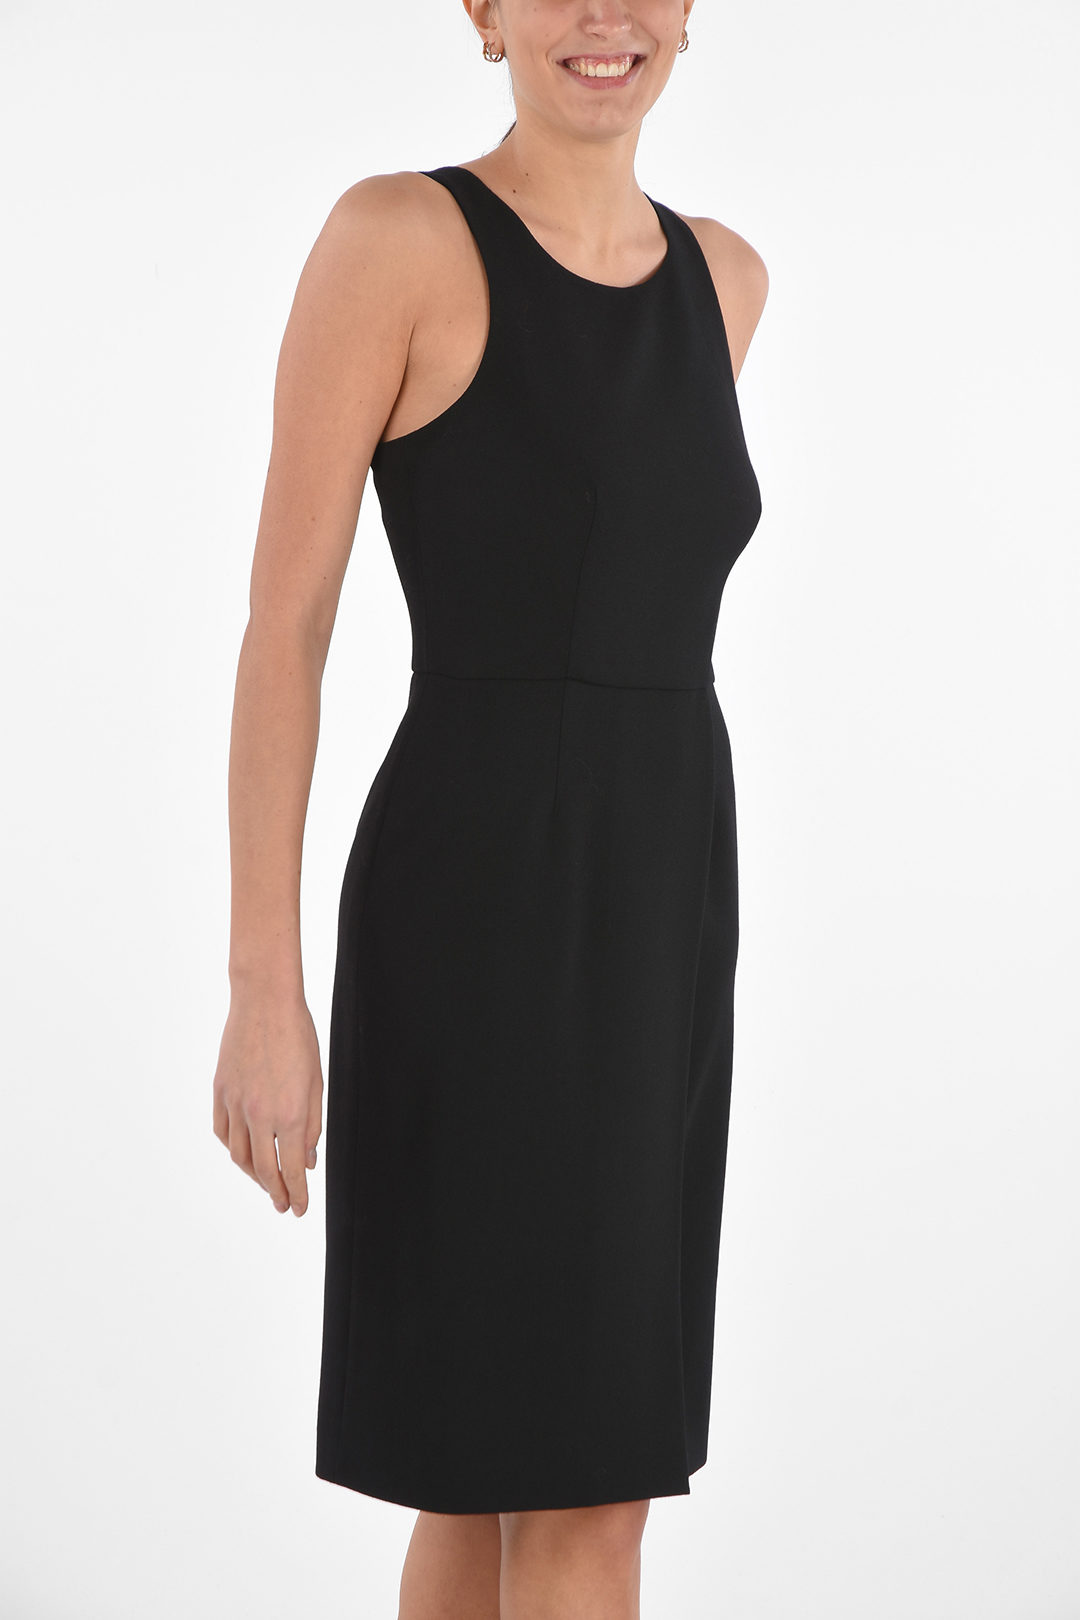 Givenchy Wool Sheath Dress with Front Split and Side Zip women ...